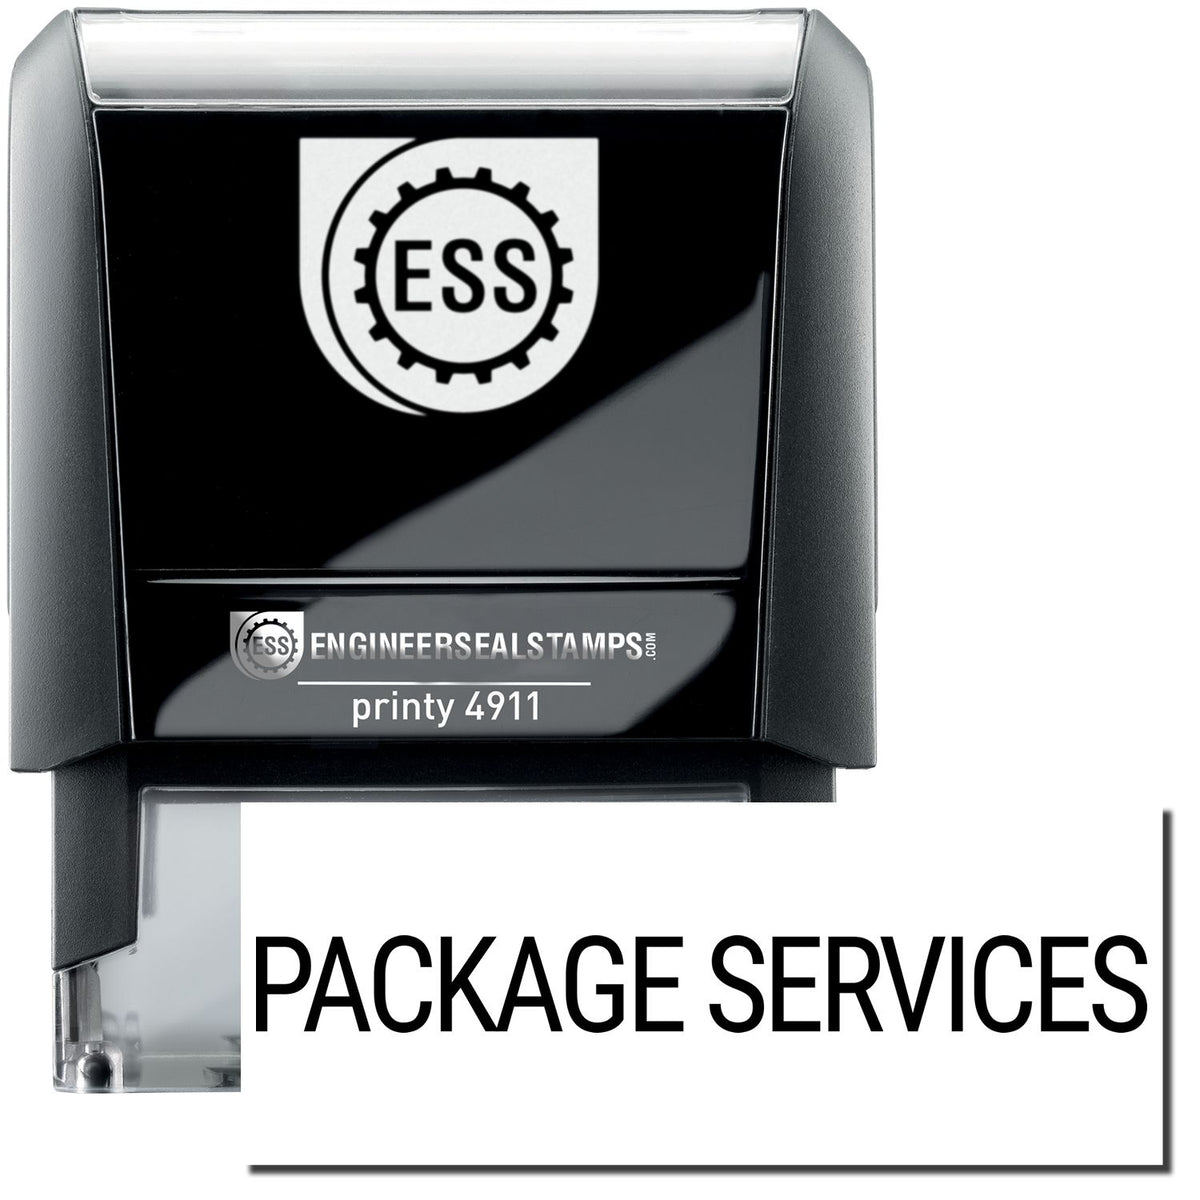 A self-inking stamp with a stamped image showing how the text &quot;PACKAGE SERVICES&quot; is displayed after stamping.